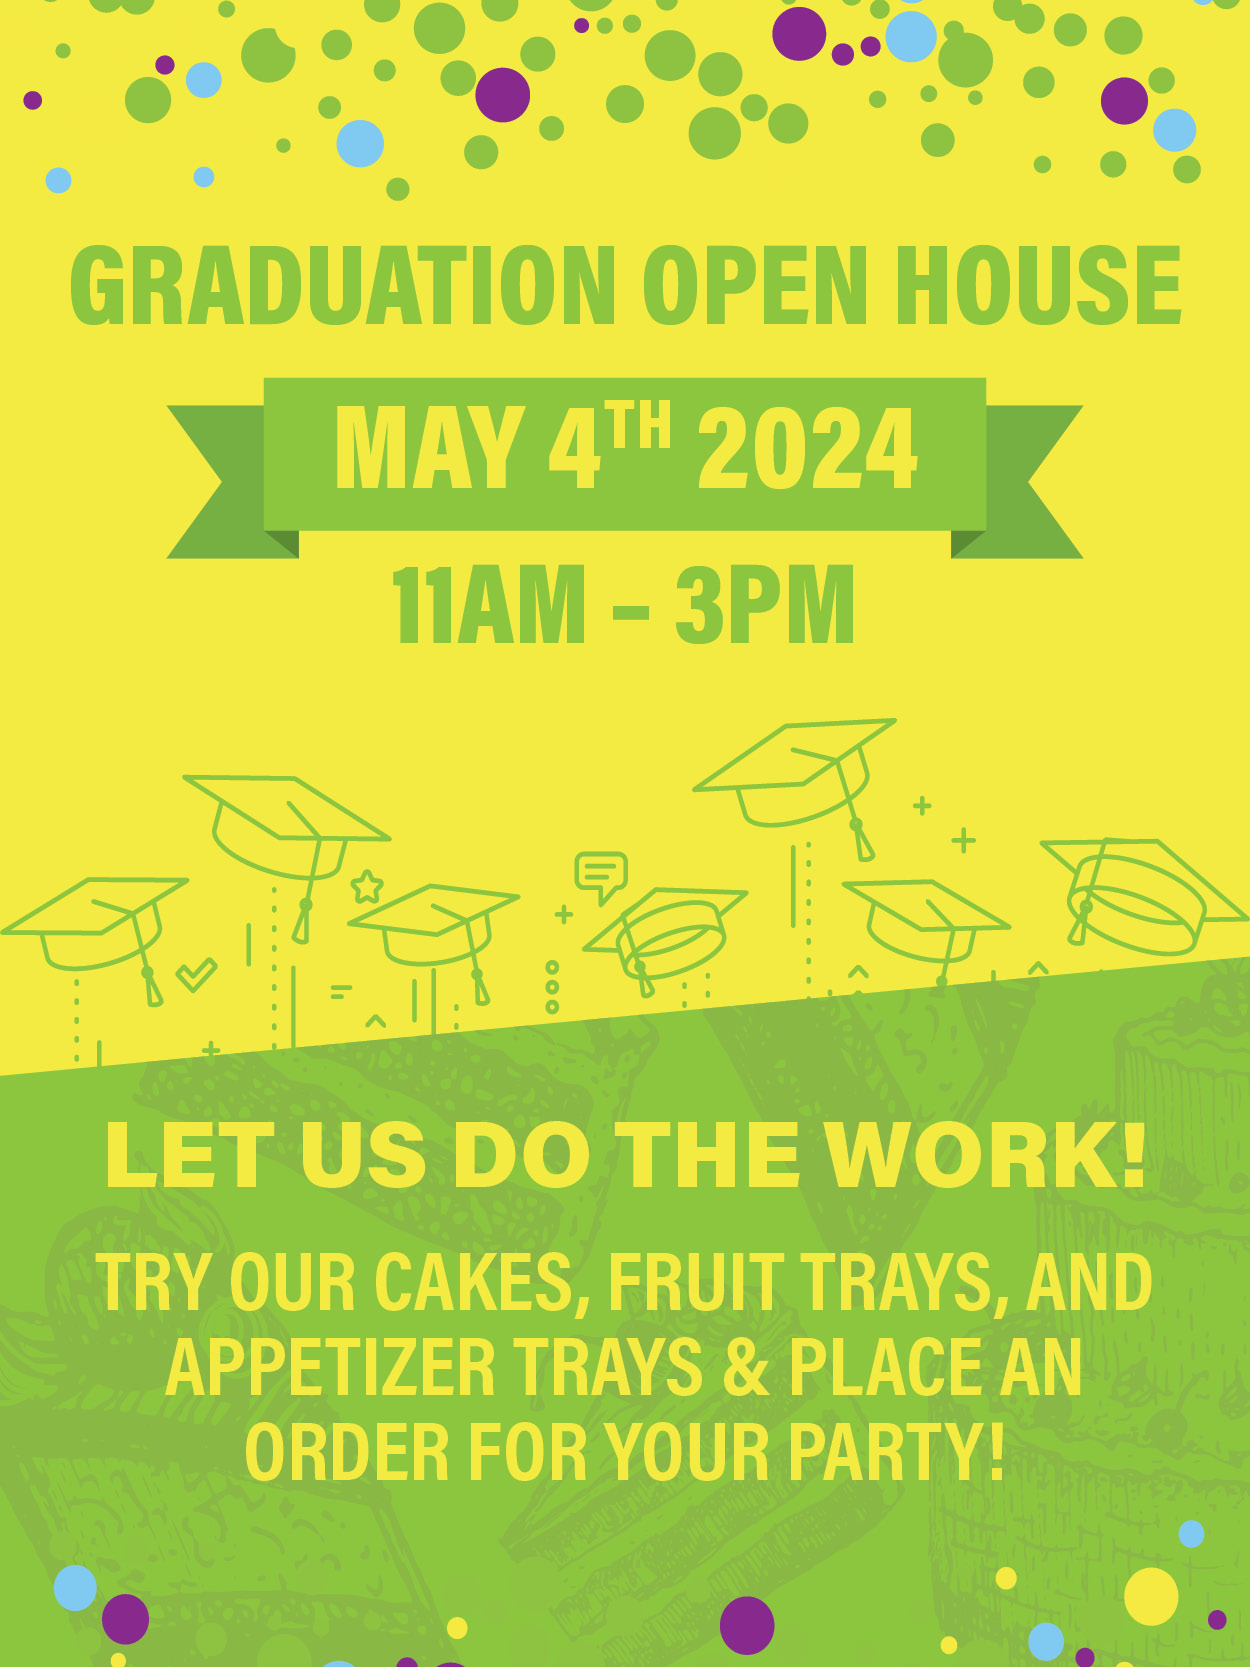 Join us on May 4th from 11 am to 3 pm for a graduation open house! Try our cakes, fruit trays, and appetizer trays, and place an order for your party. Let us do the work!